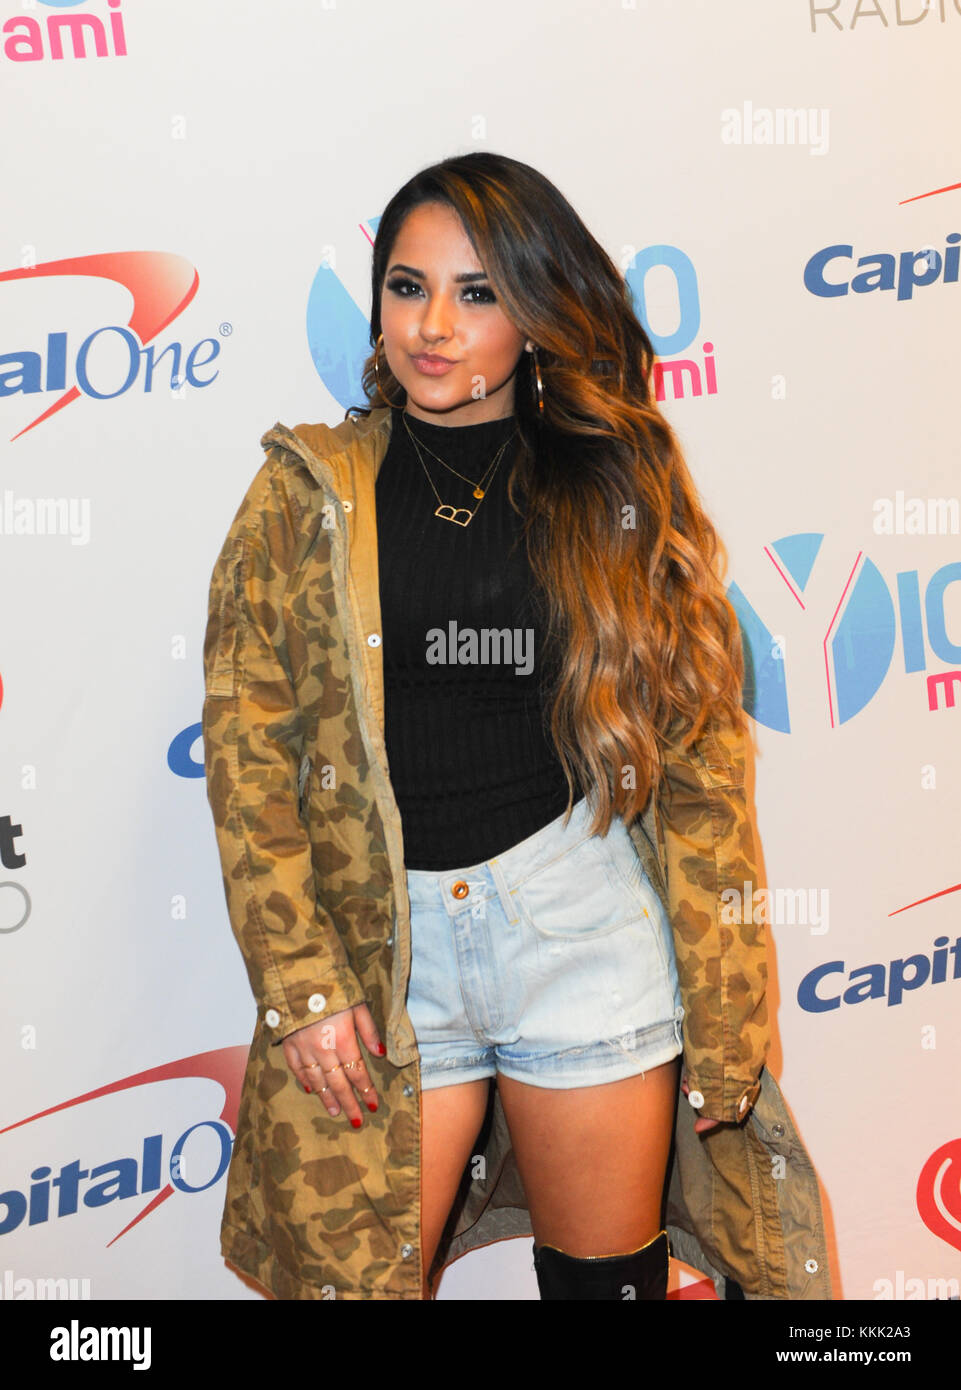 MIAMI, FL - DECEMBER 18: Becky G attends the 2015 Y100 Jingle Ball at BB&T Center on December 18, 2015 in Sunrise, Florida  People:  Becky G Stock Photo